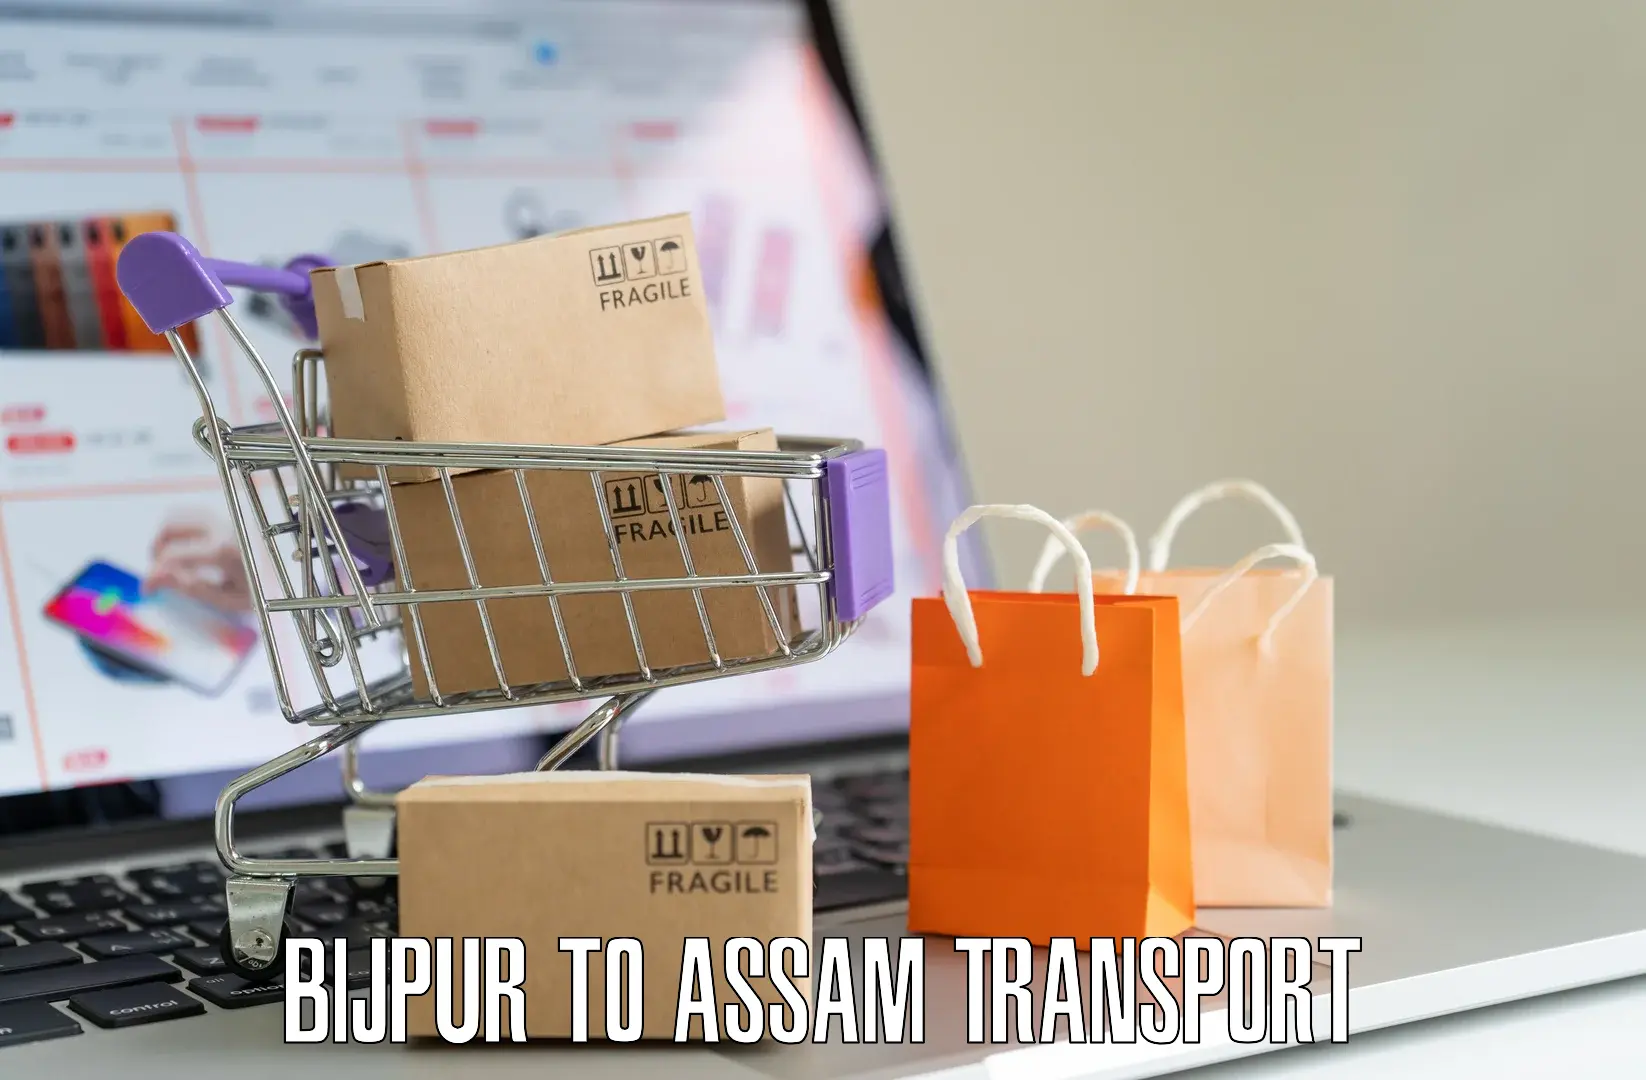 Daily parcel service transport Bijpur to Assam